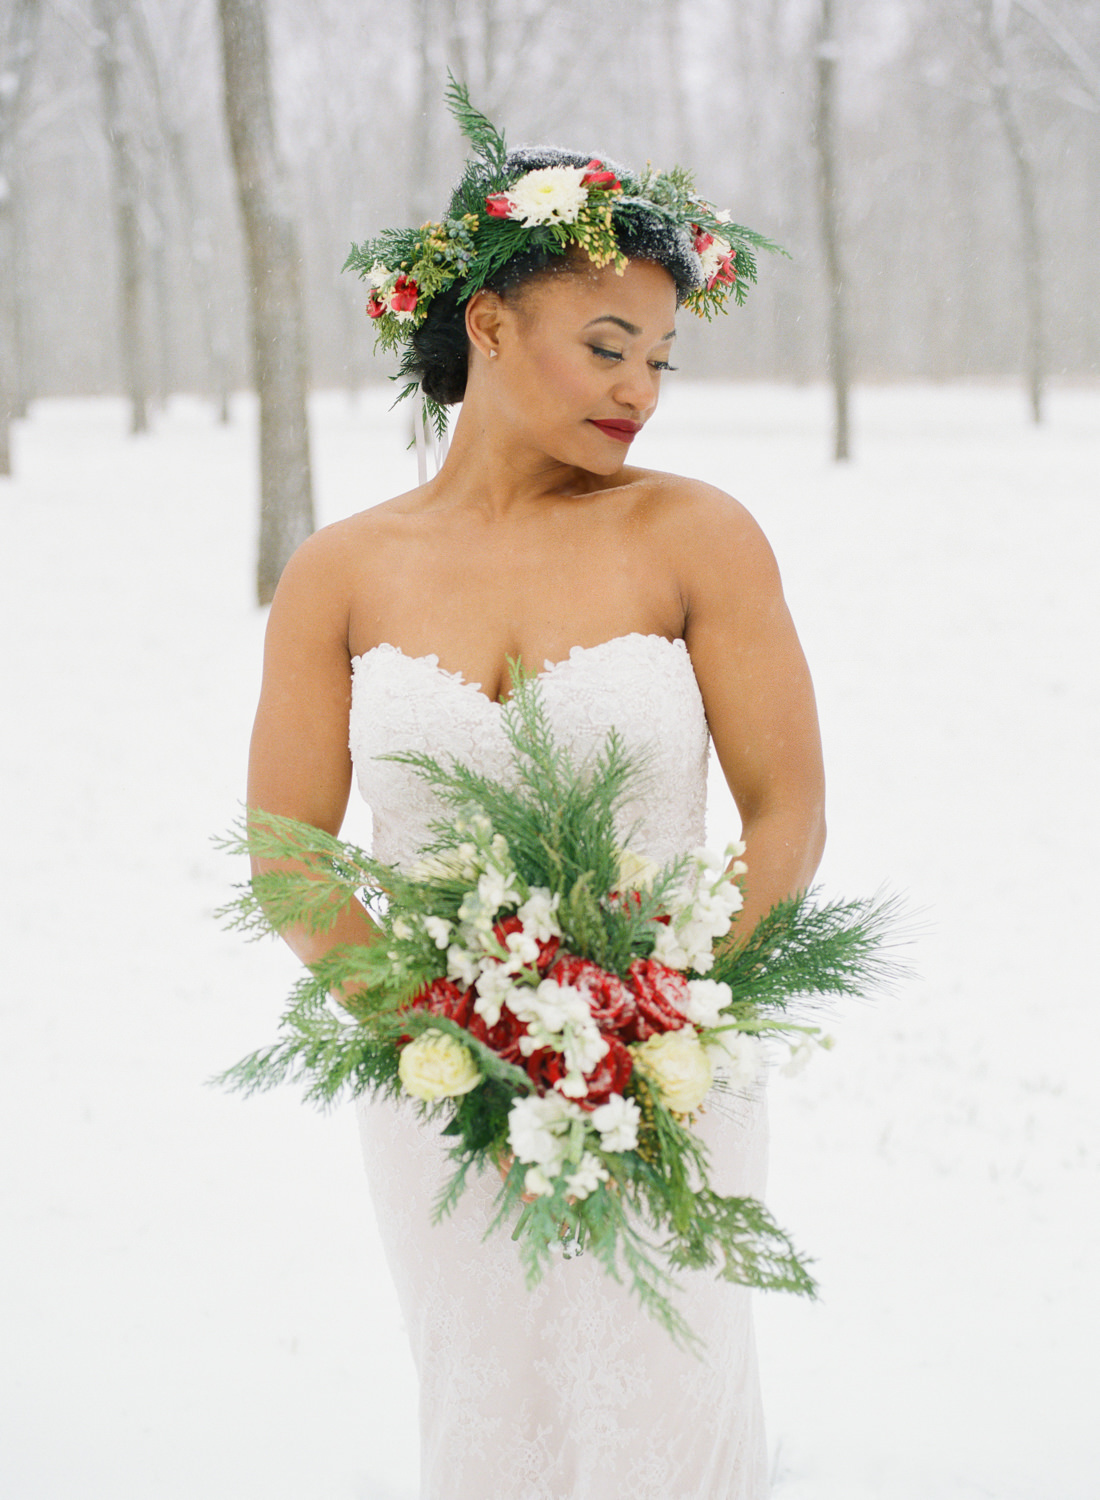 Winter wedding bride with holiday bouquet and flower crown in snow; St. Louis fine art film wedding photographer Erica Robnett Photography